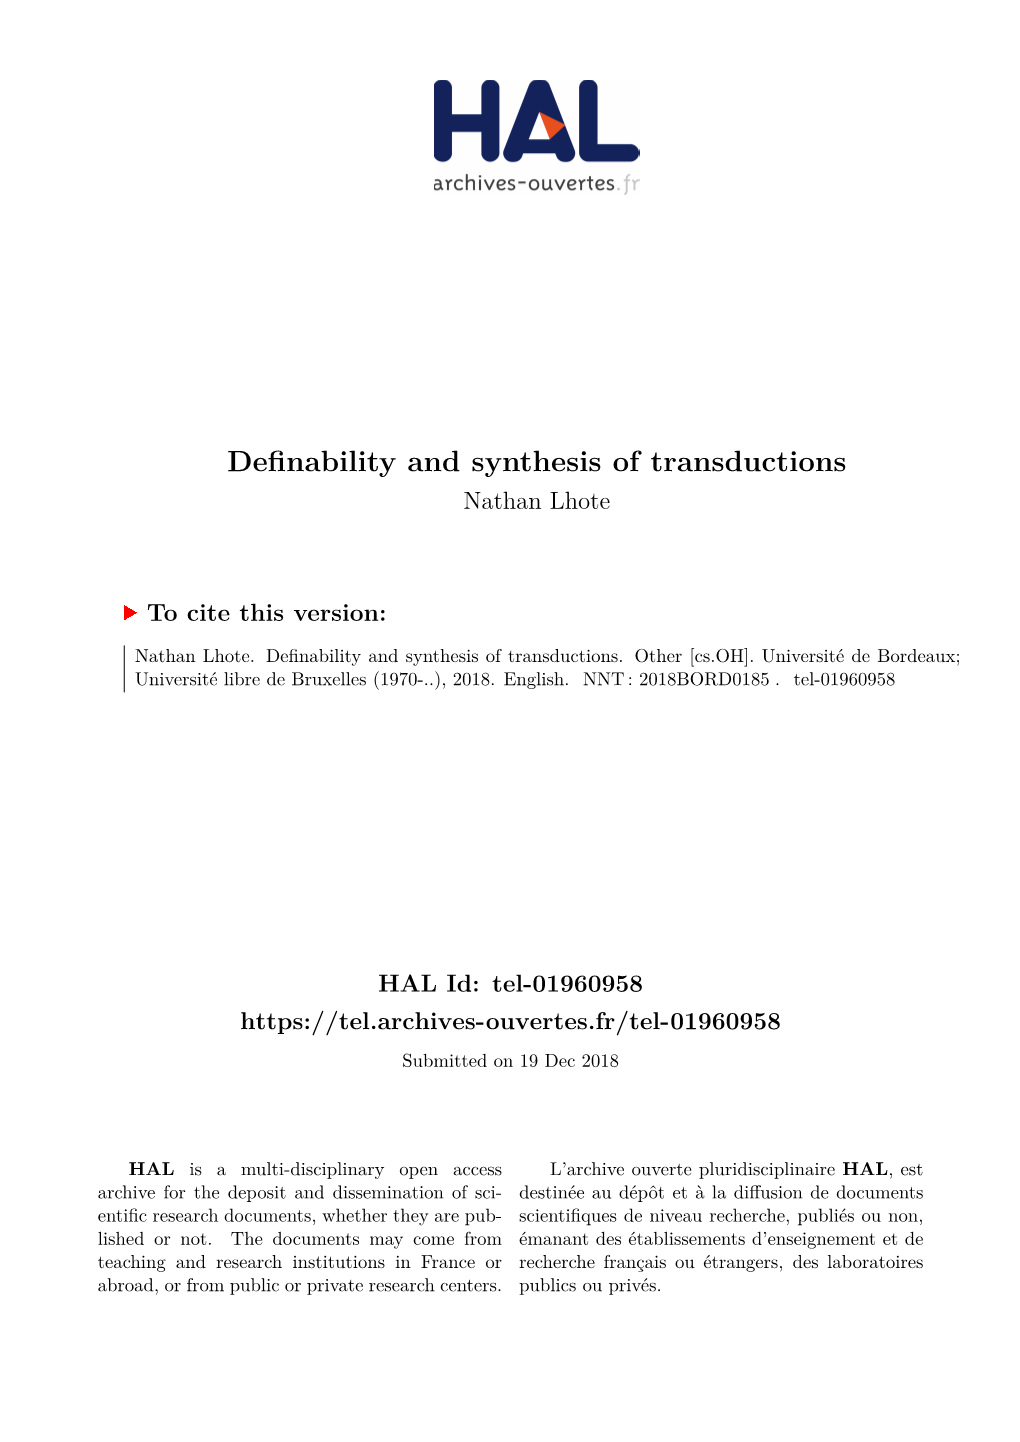 Definability and Synthesis of Transductions Nathan Lhote